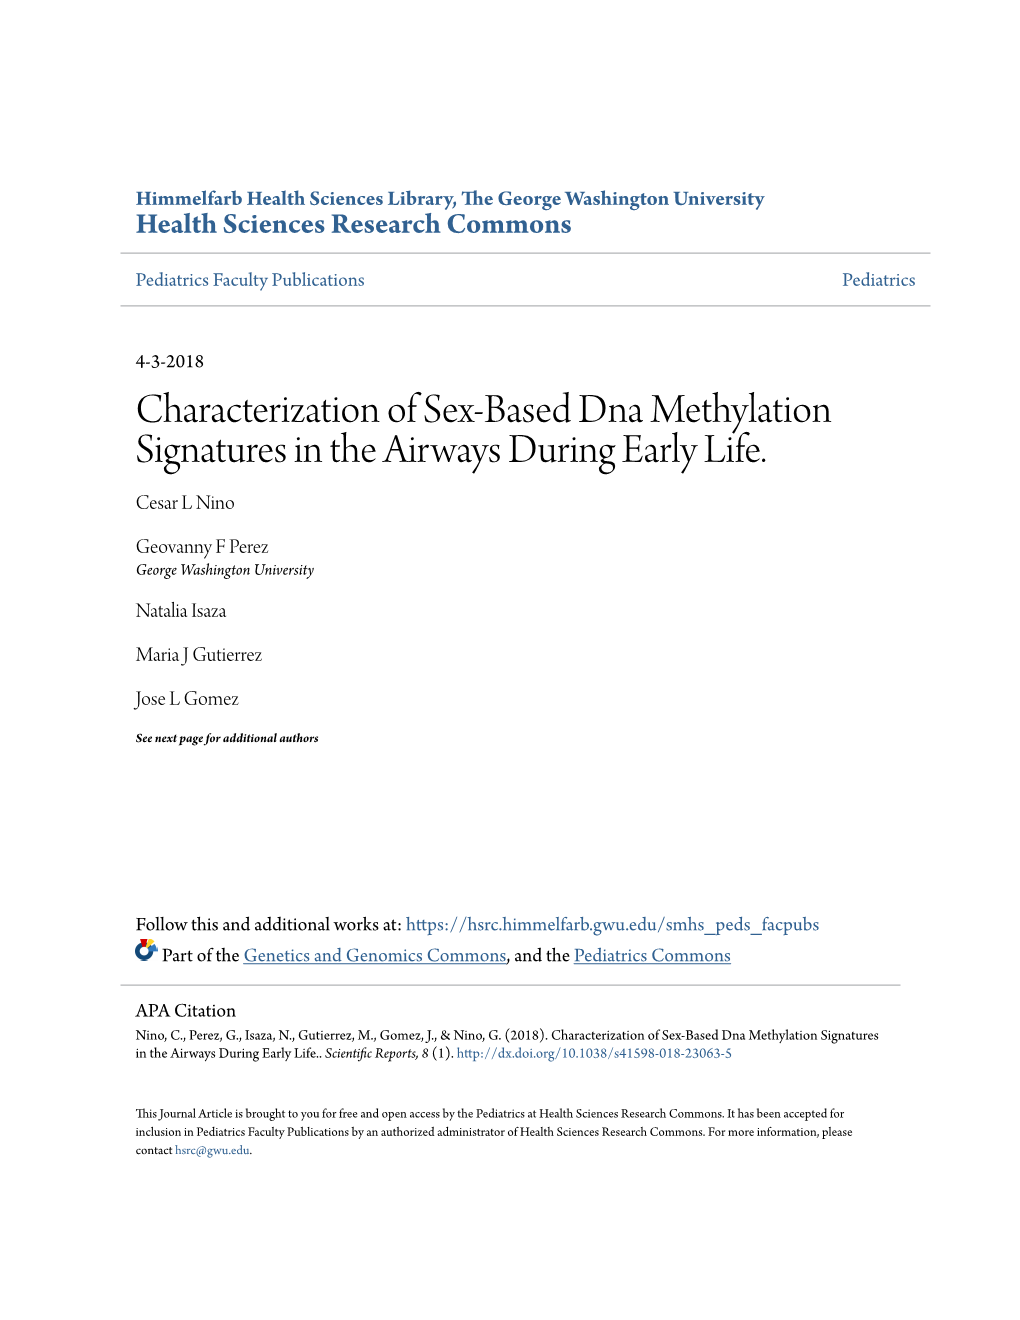 Characterization of Sex-Based Dna Methylation Signatures in the Airways During Early Life